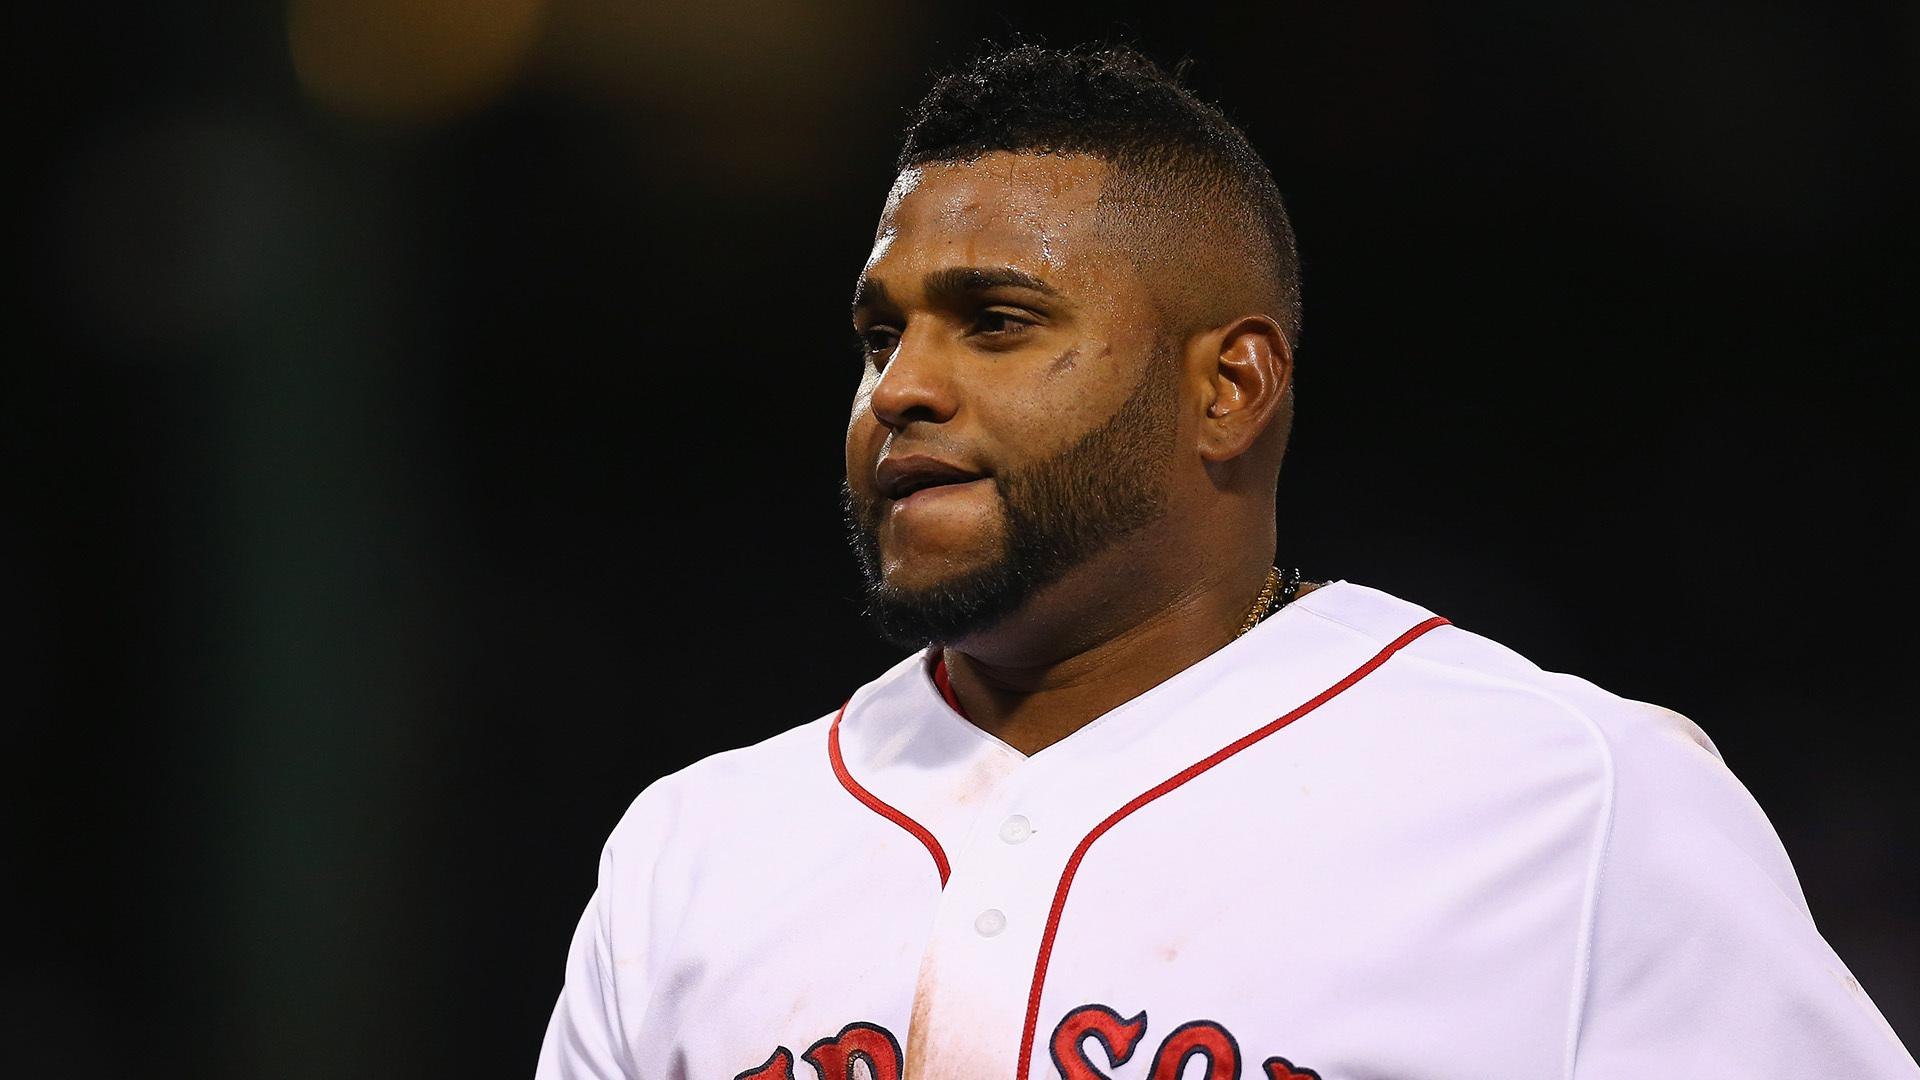 ⁣Pablo Sandoval Benched for Liking Photo on Instagram